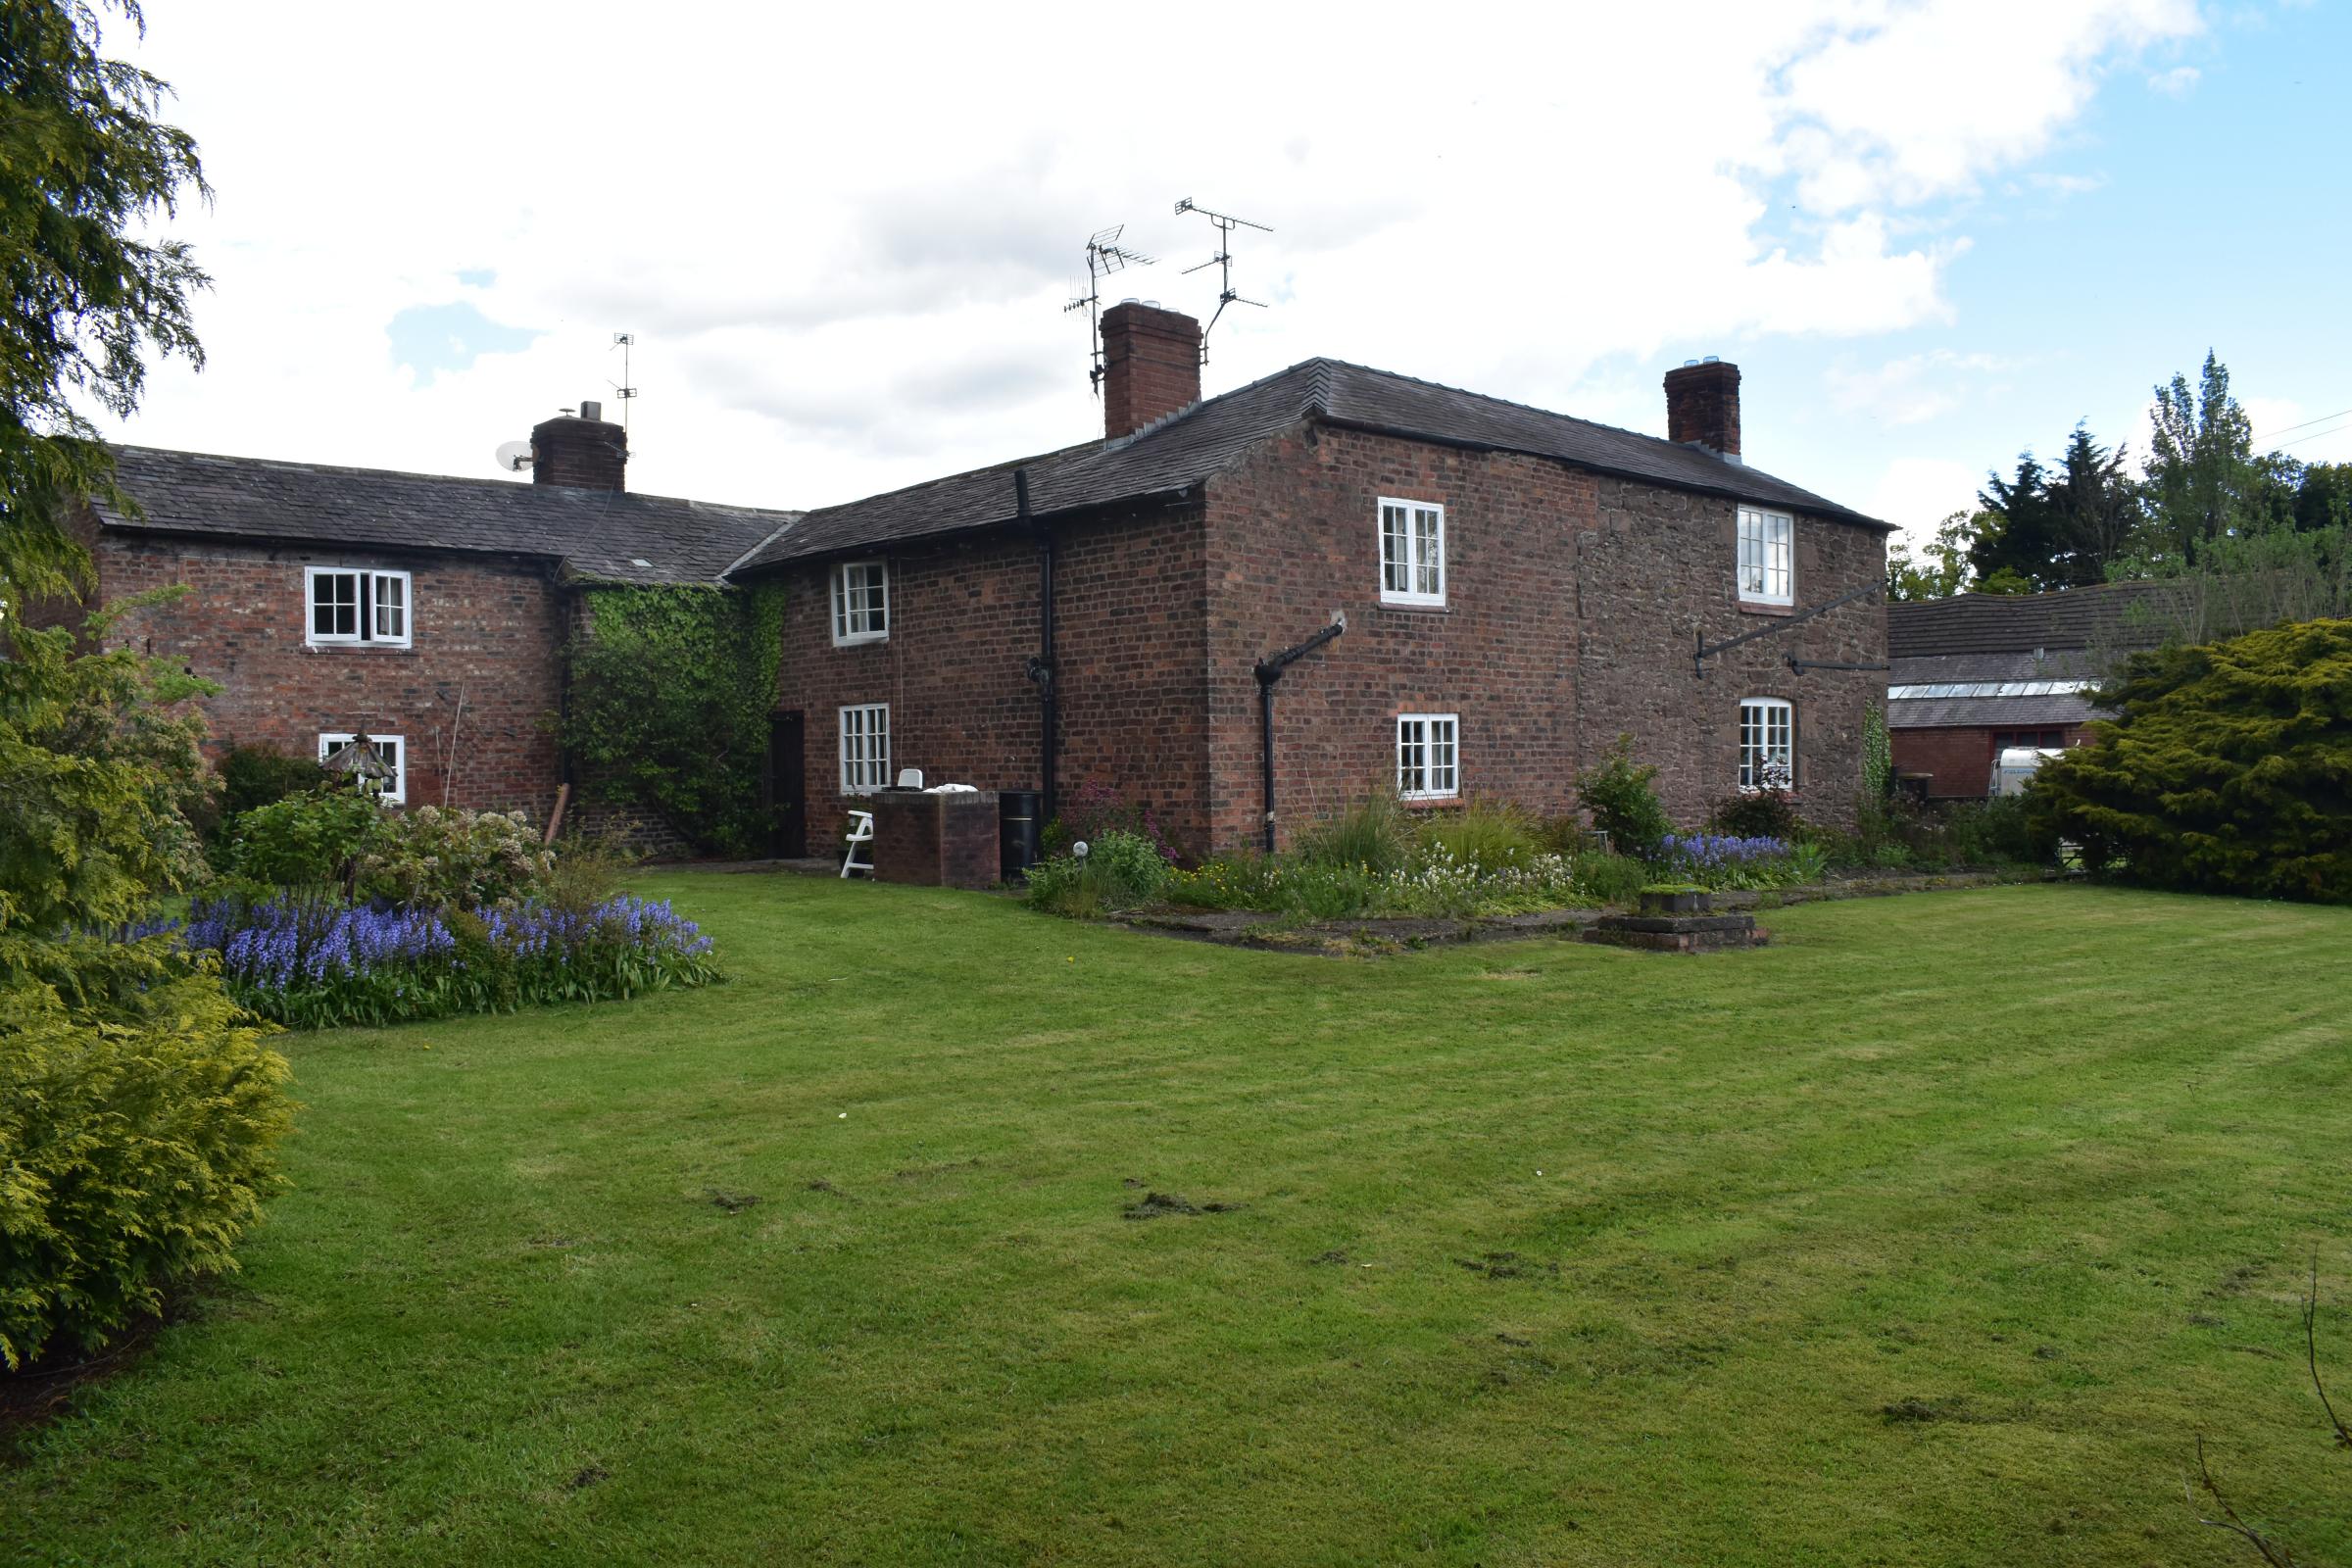 Pickhill Farm, Pickhill, Marchwiel, Wrexham has come up for sale. @Brown&Co LLP